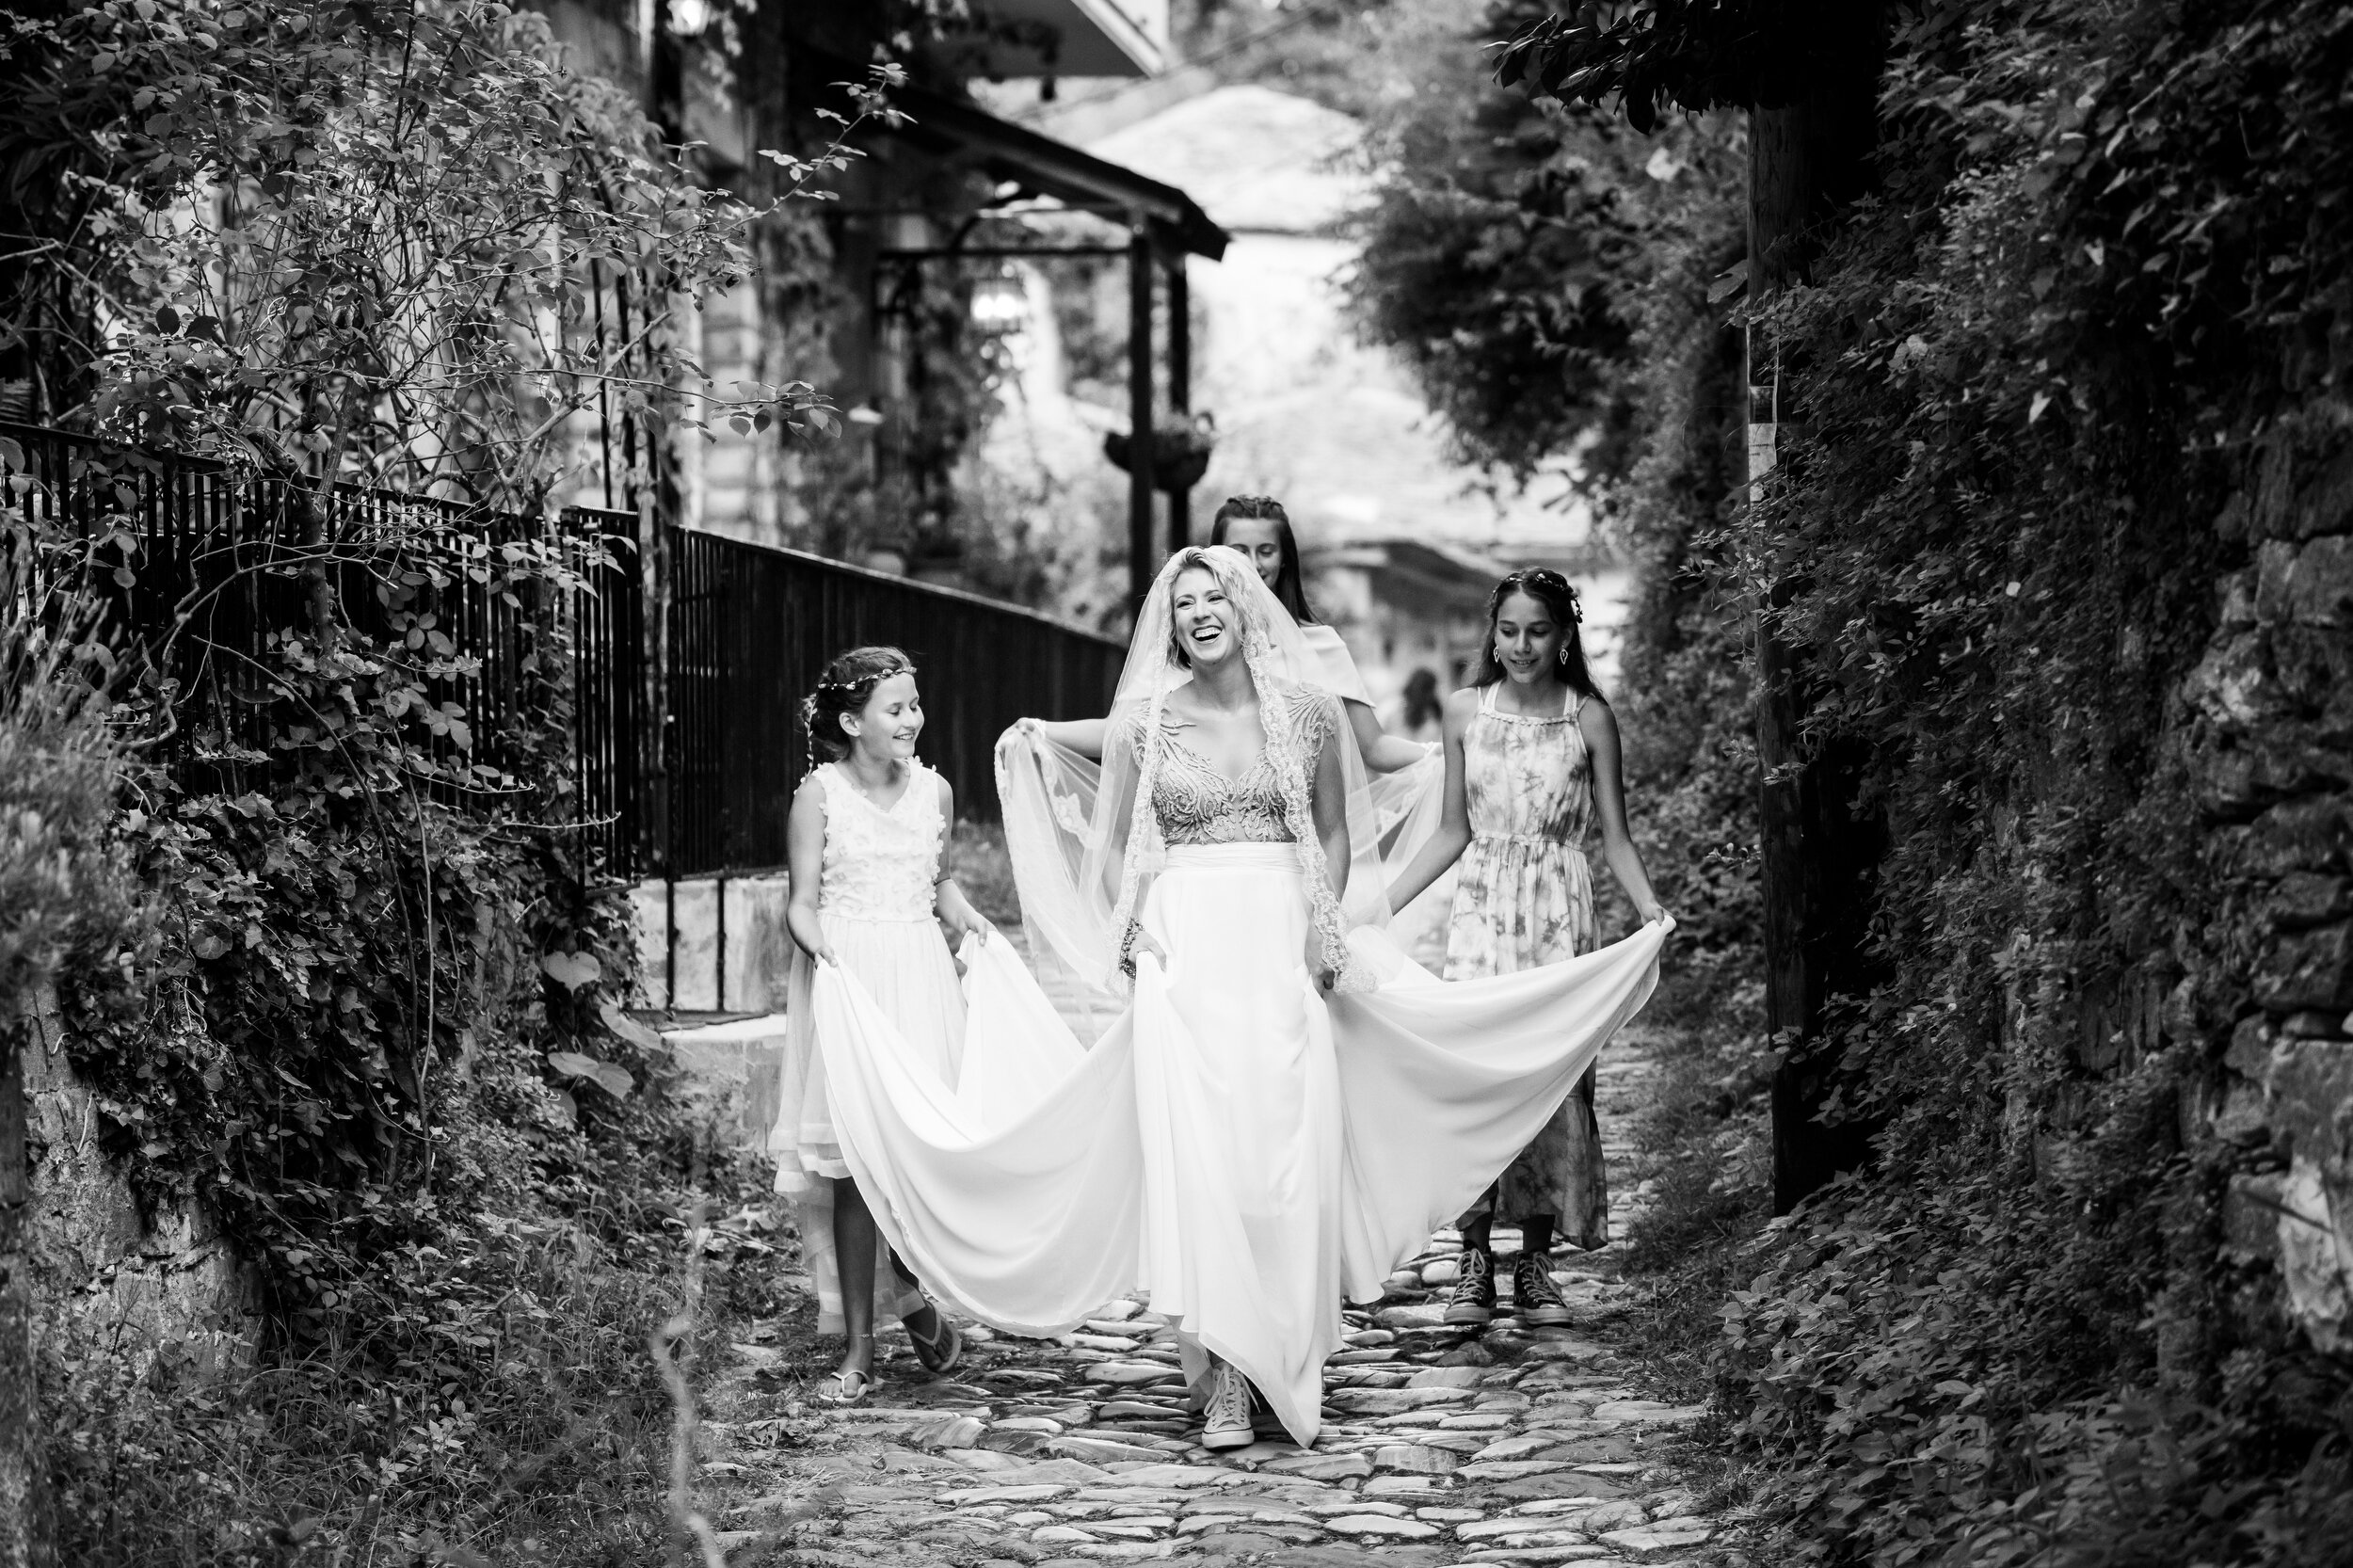 Bride and flower girls process to the wedding ceremony:  destination wedding photo at the Lost Unicorn Hotel, Tsagarada, Greece by J. Brown Photography.